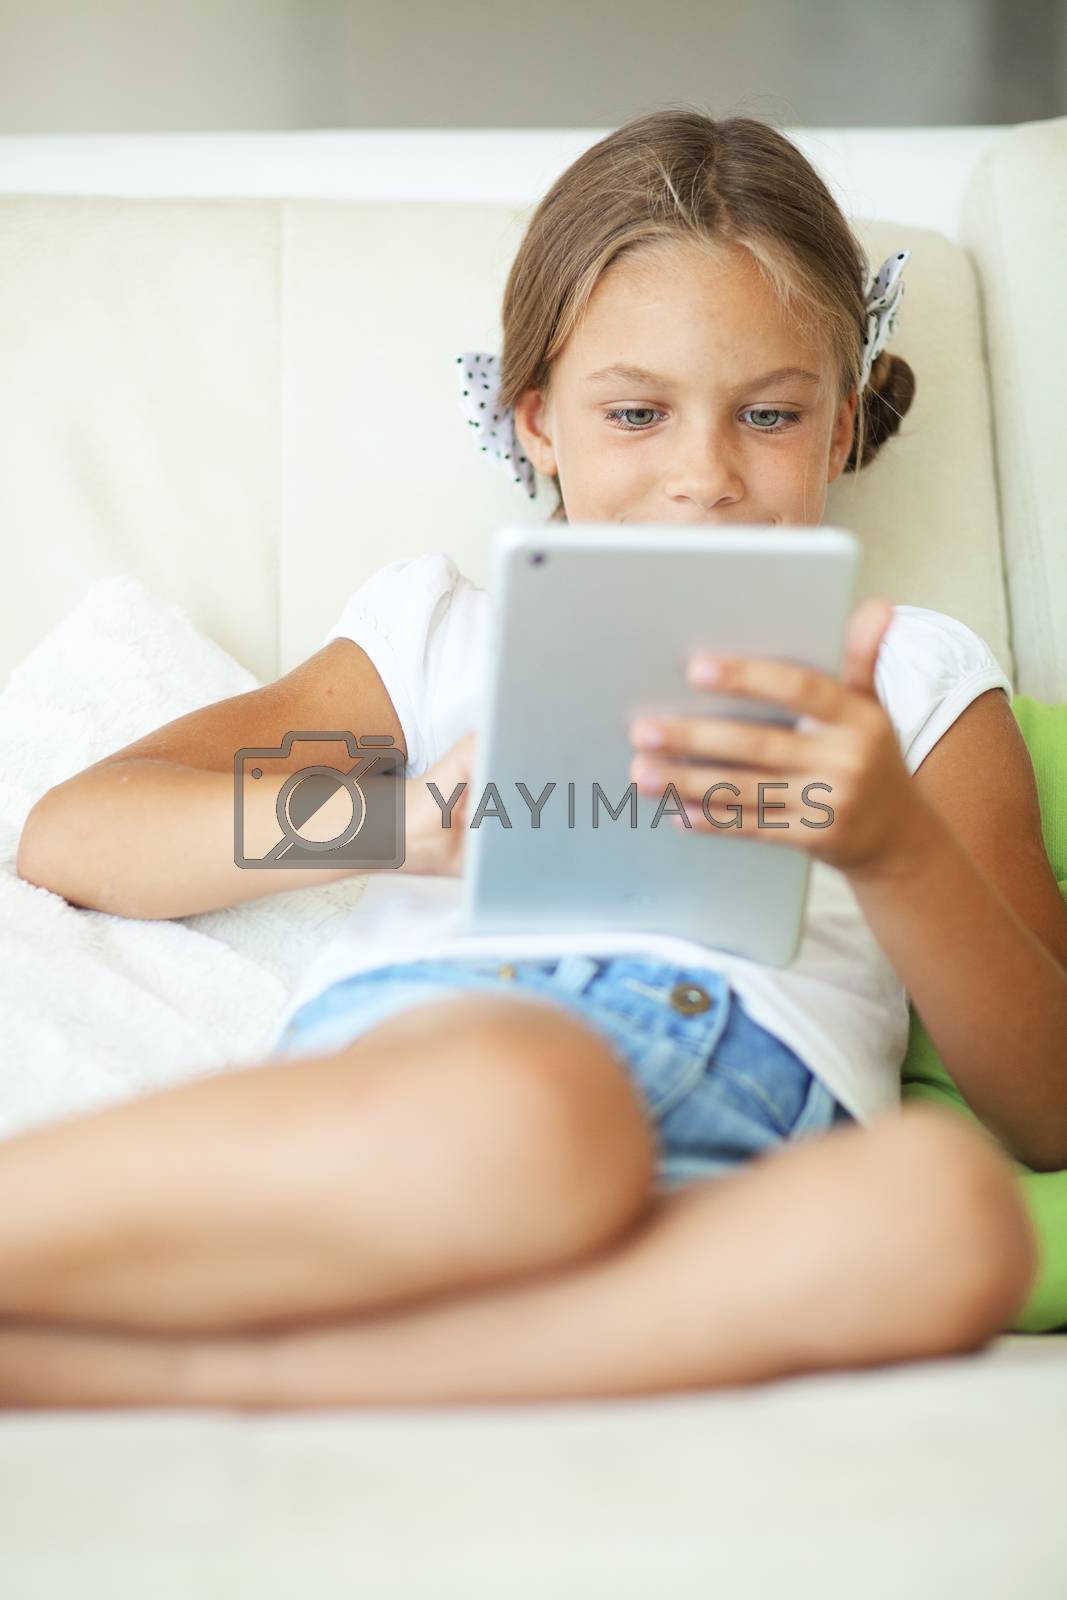 Royalty free image of Child playing on tablet pc by alenkasm